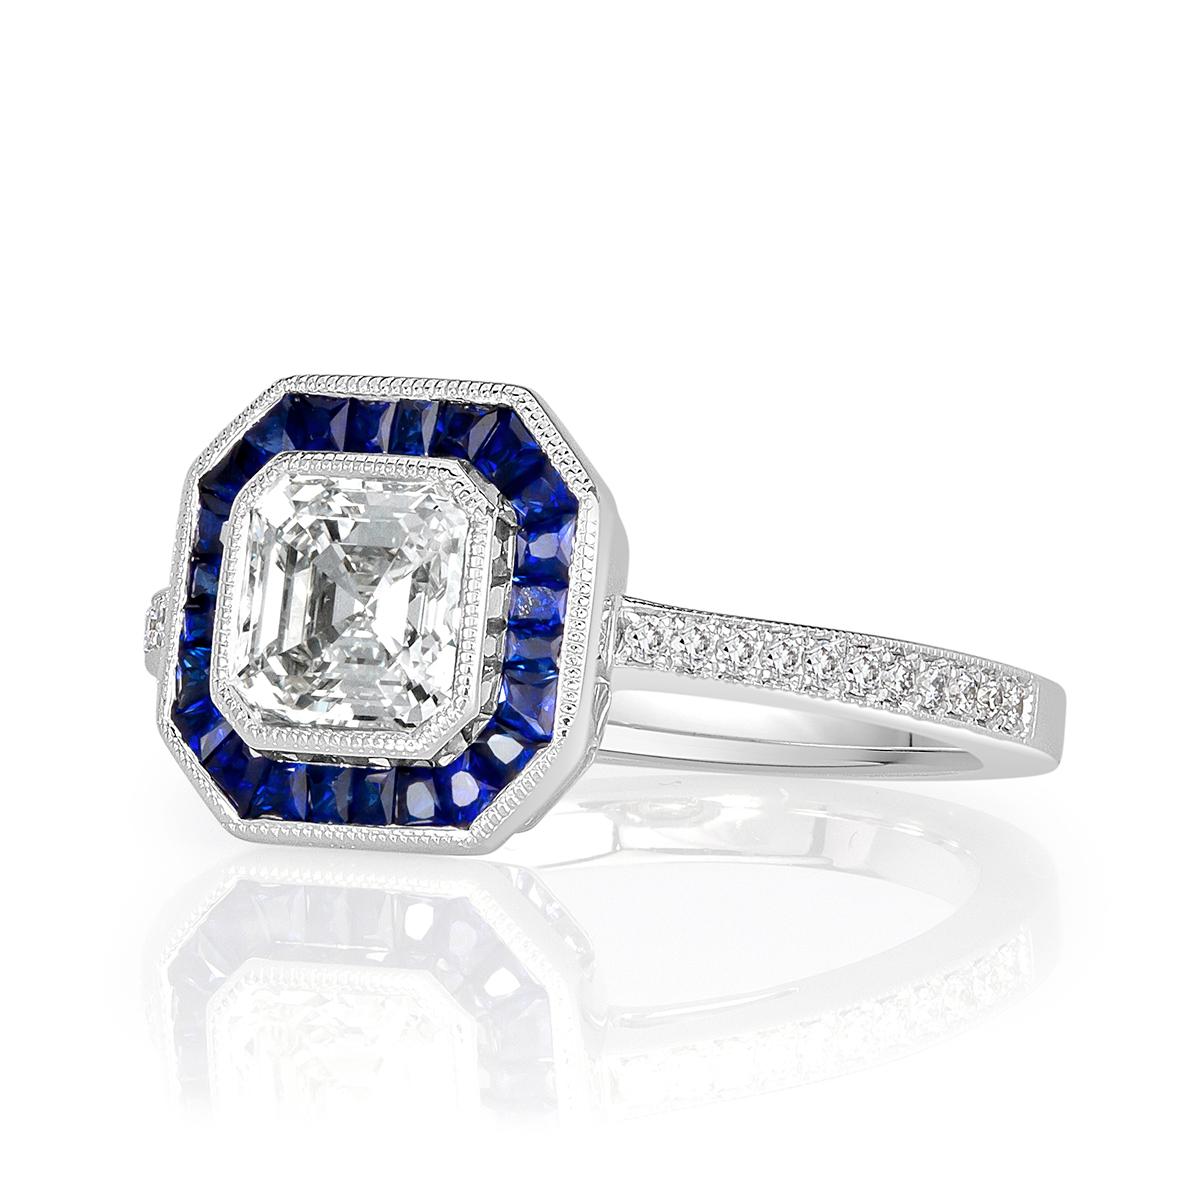 This very unique Asscher cut diamond engagement ring showcases a 1.01ct center diamond, GIA certified at J-VS1. It is bezel set in an 18k white gold center basket featuring hand milgrain detail throughout and accented by a halo of tapered baguette